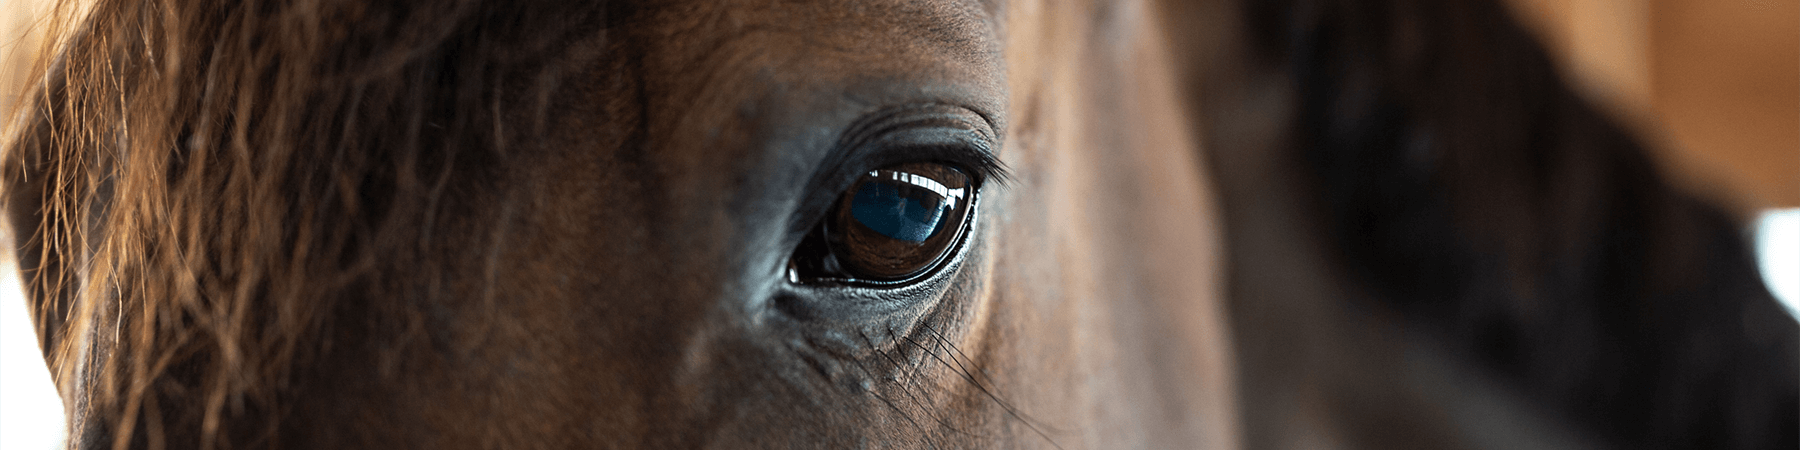 Close-up picture of a horse's eye and face